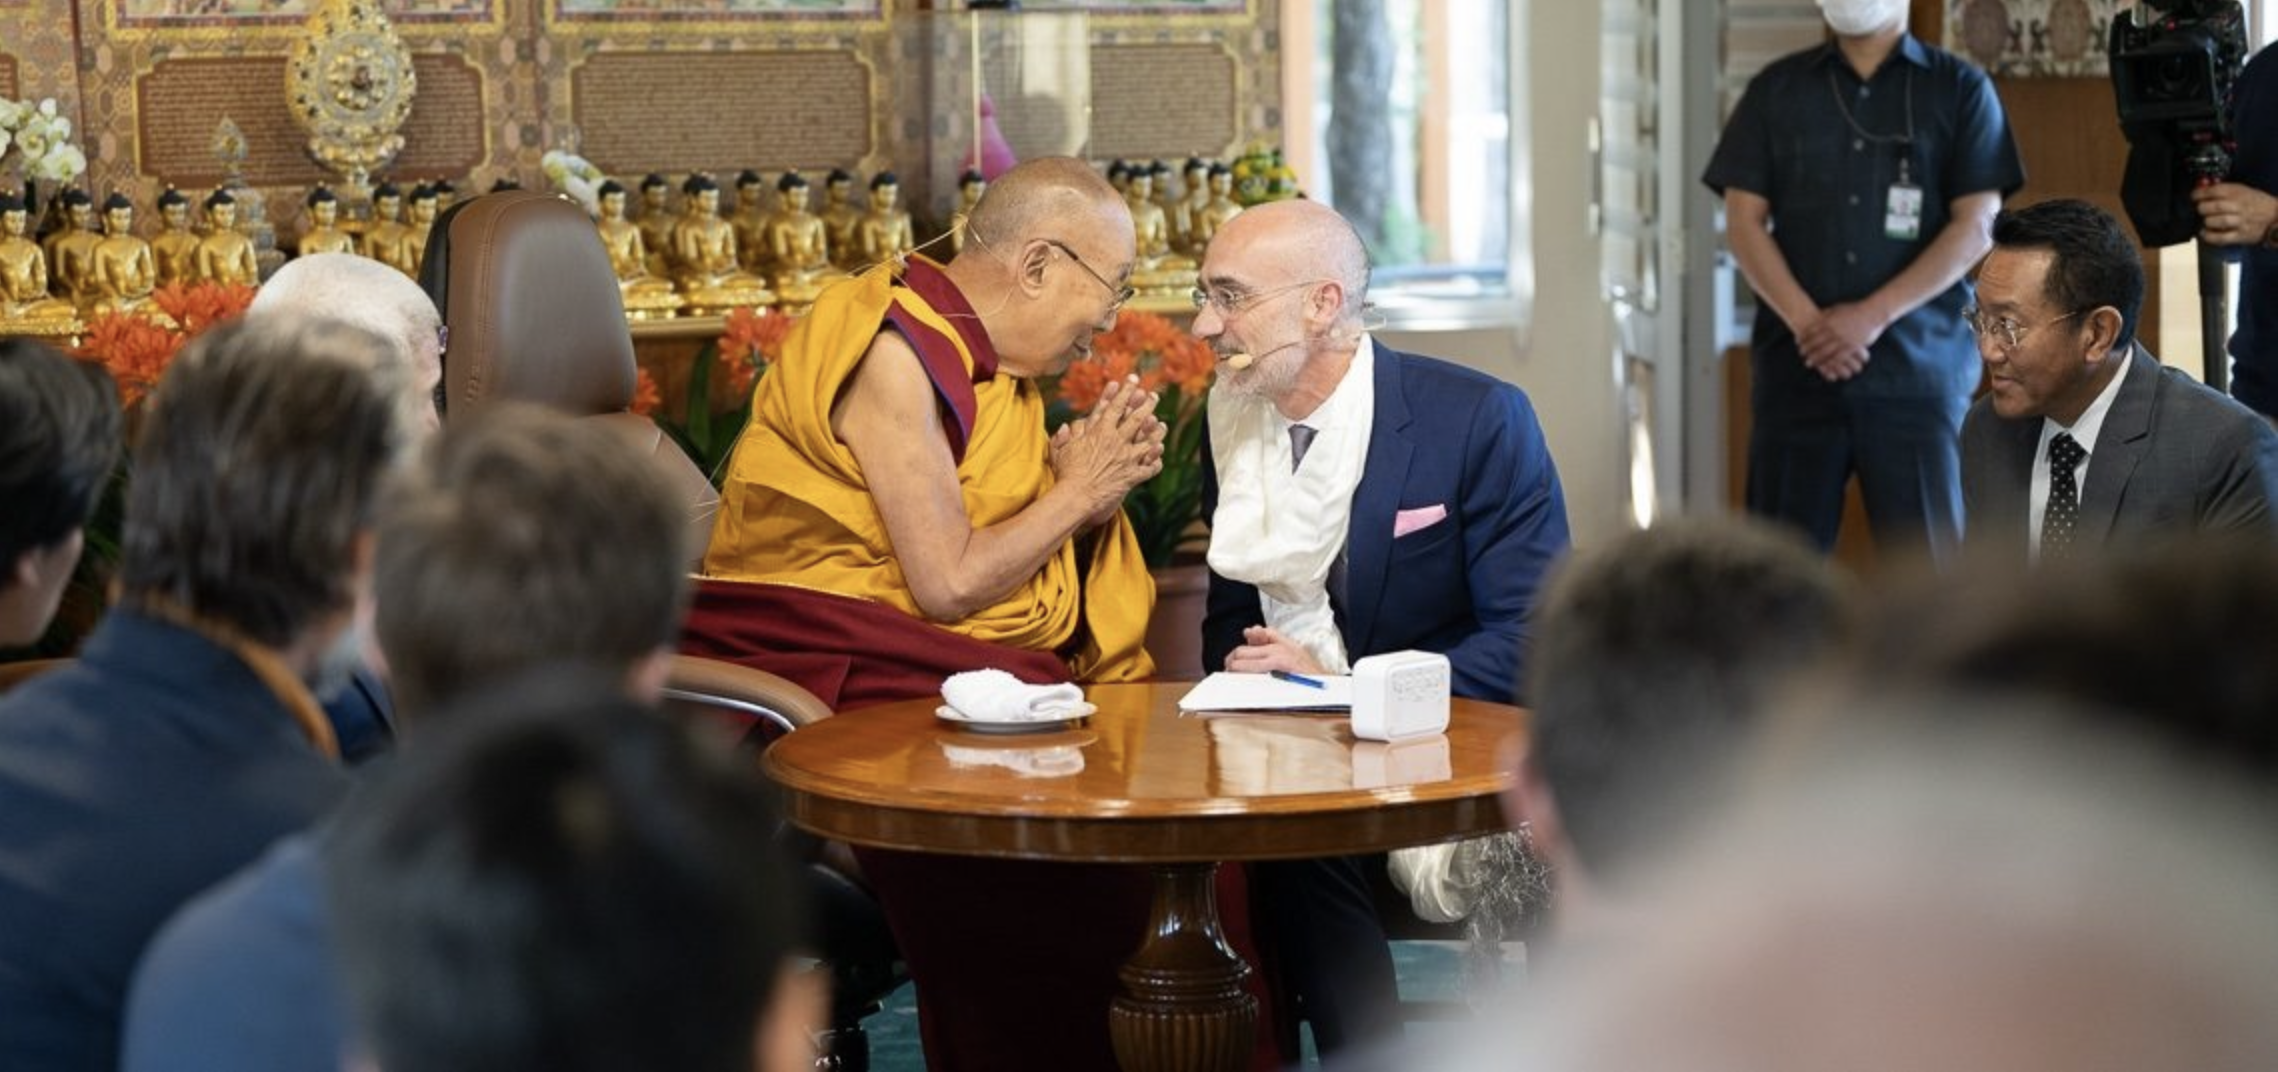 His Holiness the 14th Dalai Lama of Tibet: Discussion with Groups from Harvard